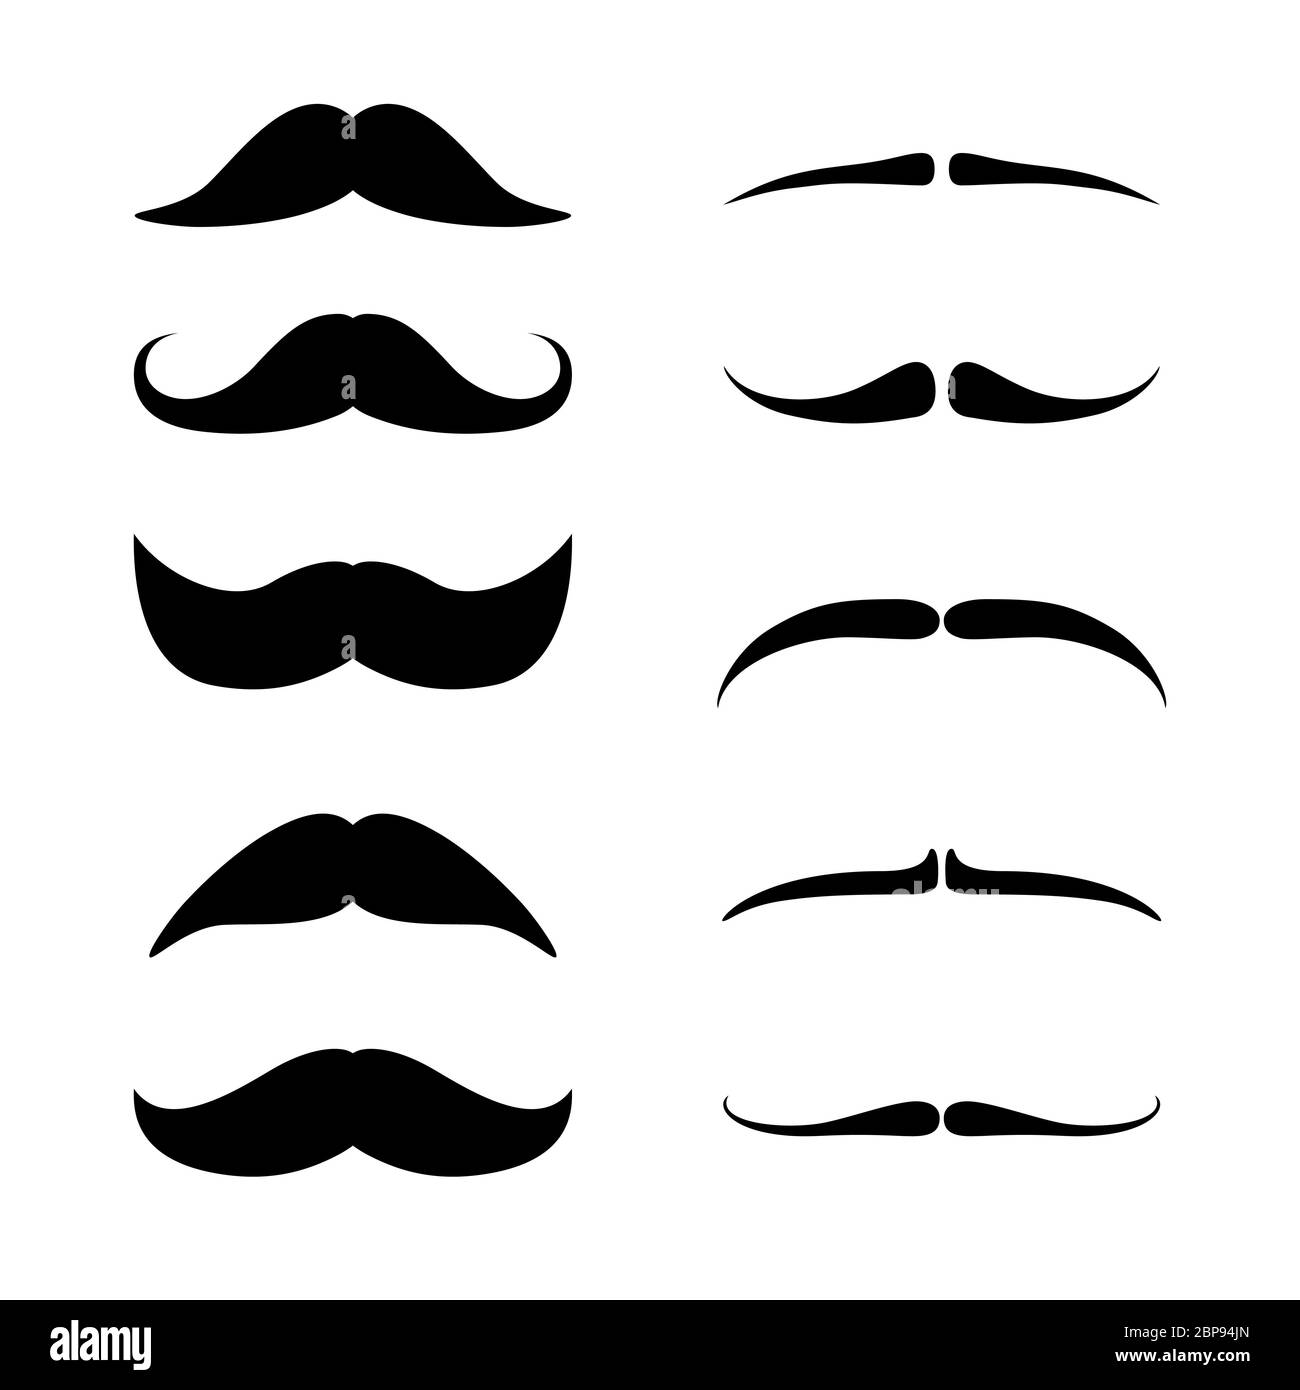 Mustaches set. Black silhouette of adult man moustaches. Vector illustration isolated on white Stock Vector